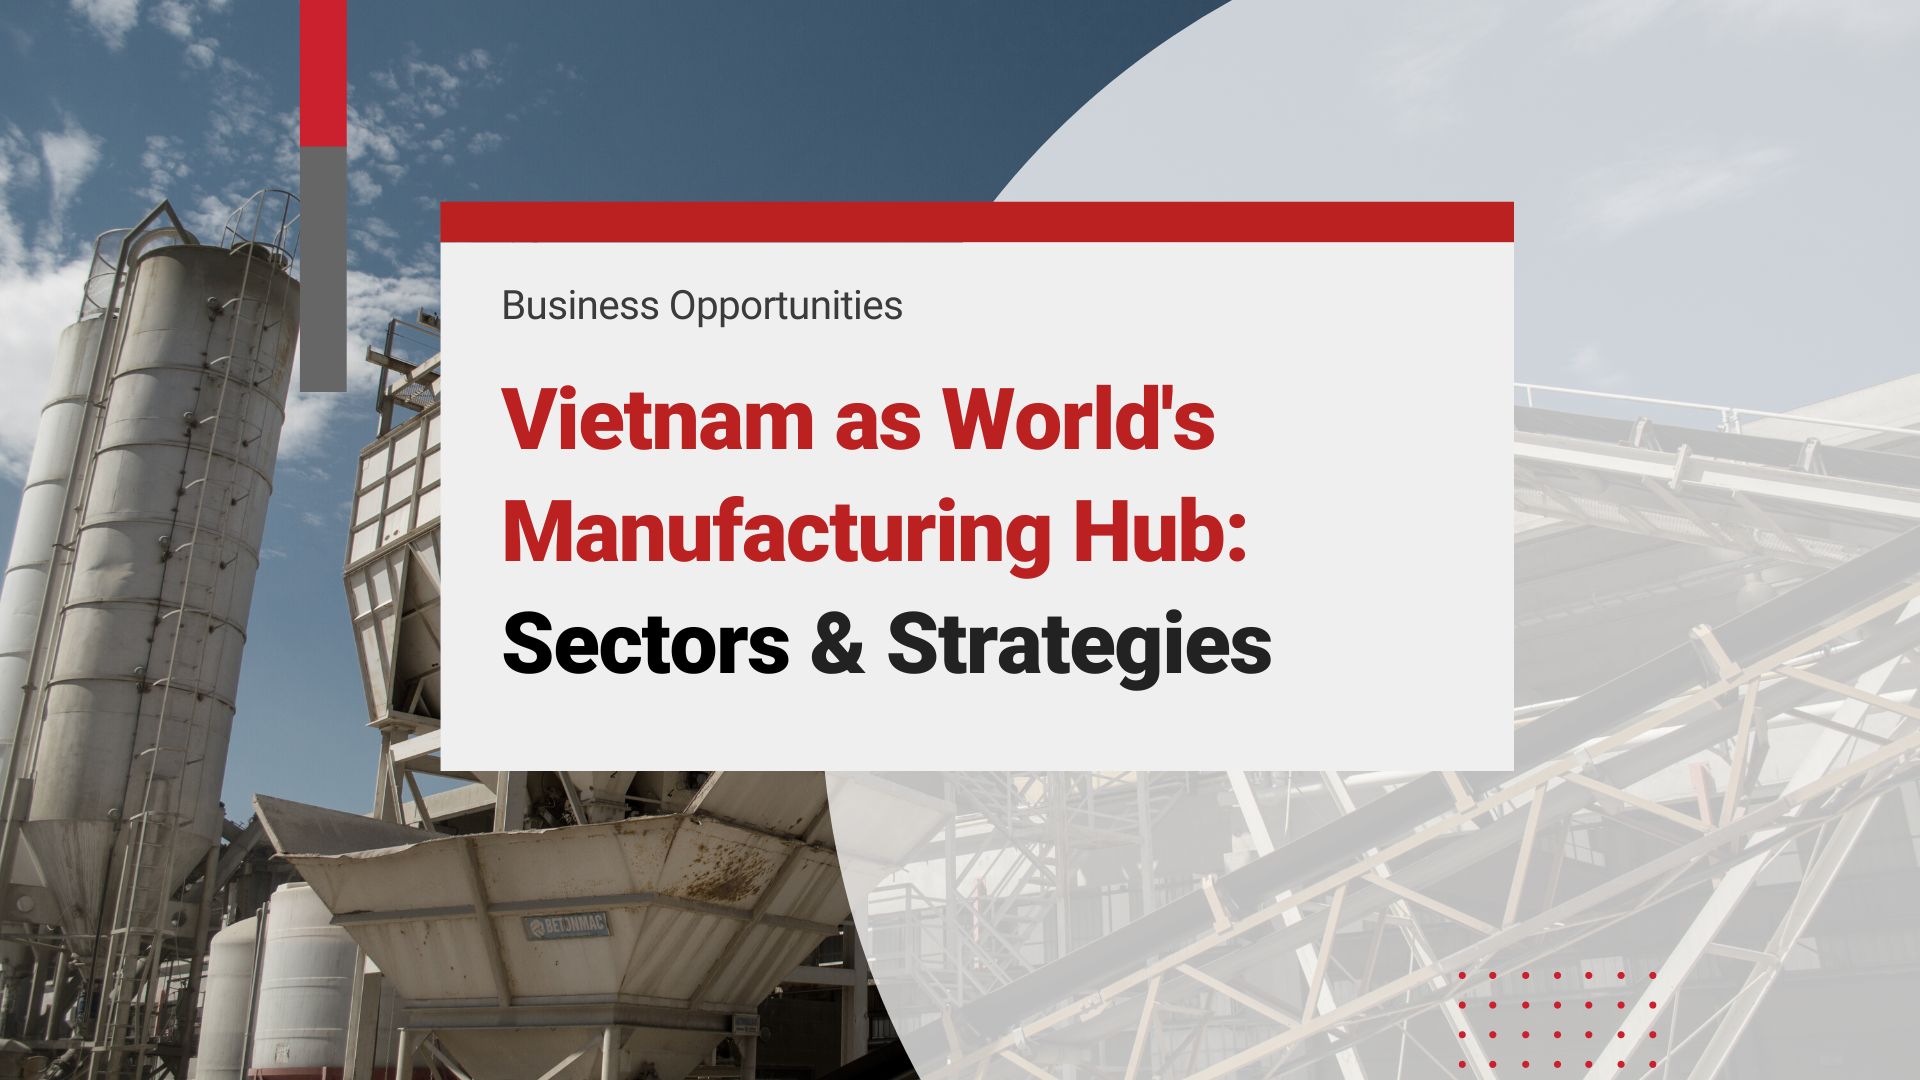 Growth Opportunities in Vietnam: World’s Manufacturing Hub, Key Industries, and Market Entry Strategies